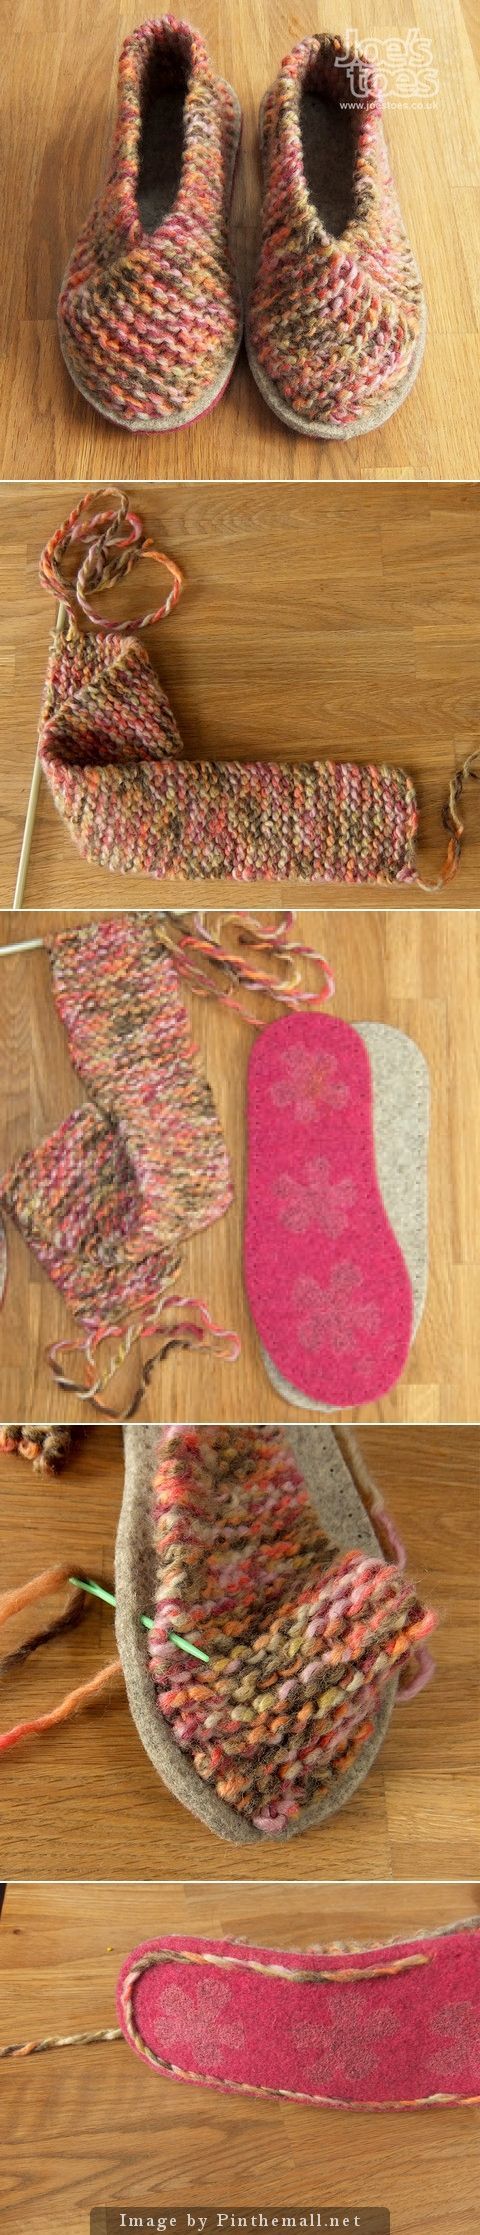 #Knitting_Tutorial - "How to make Knitted Garter Stitch Slippers. This looks fas...